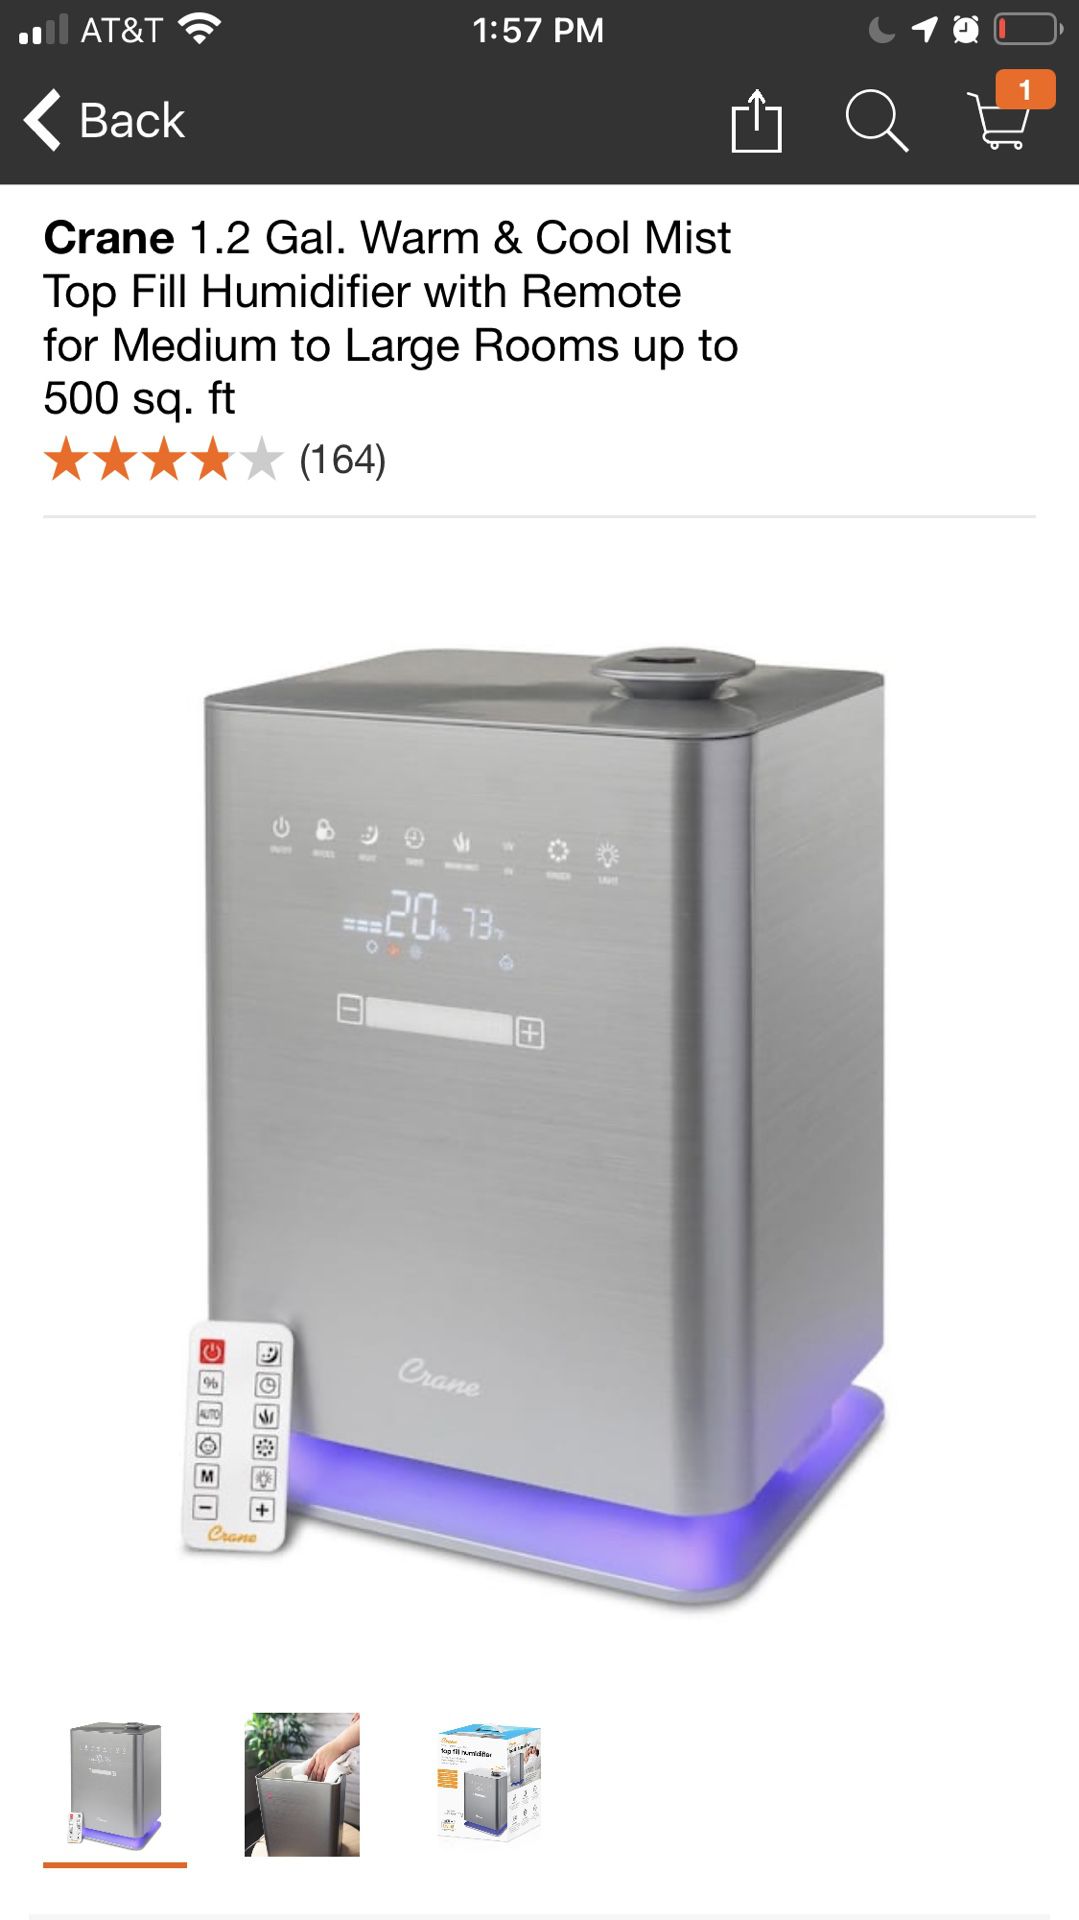 Crane 1.2 Gal. Warm & Cool Mist Top Fill Humidifier with Remote for Medium to Large Rooms up to 500 sq. ft